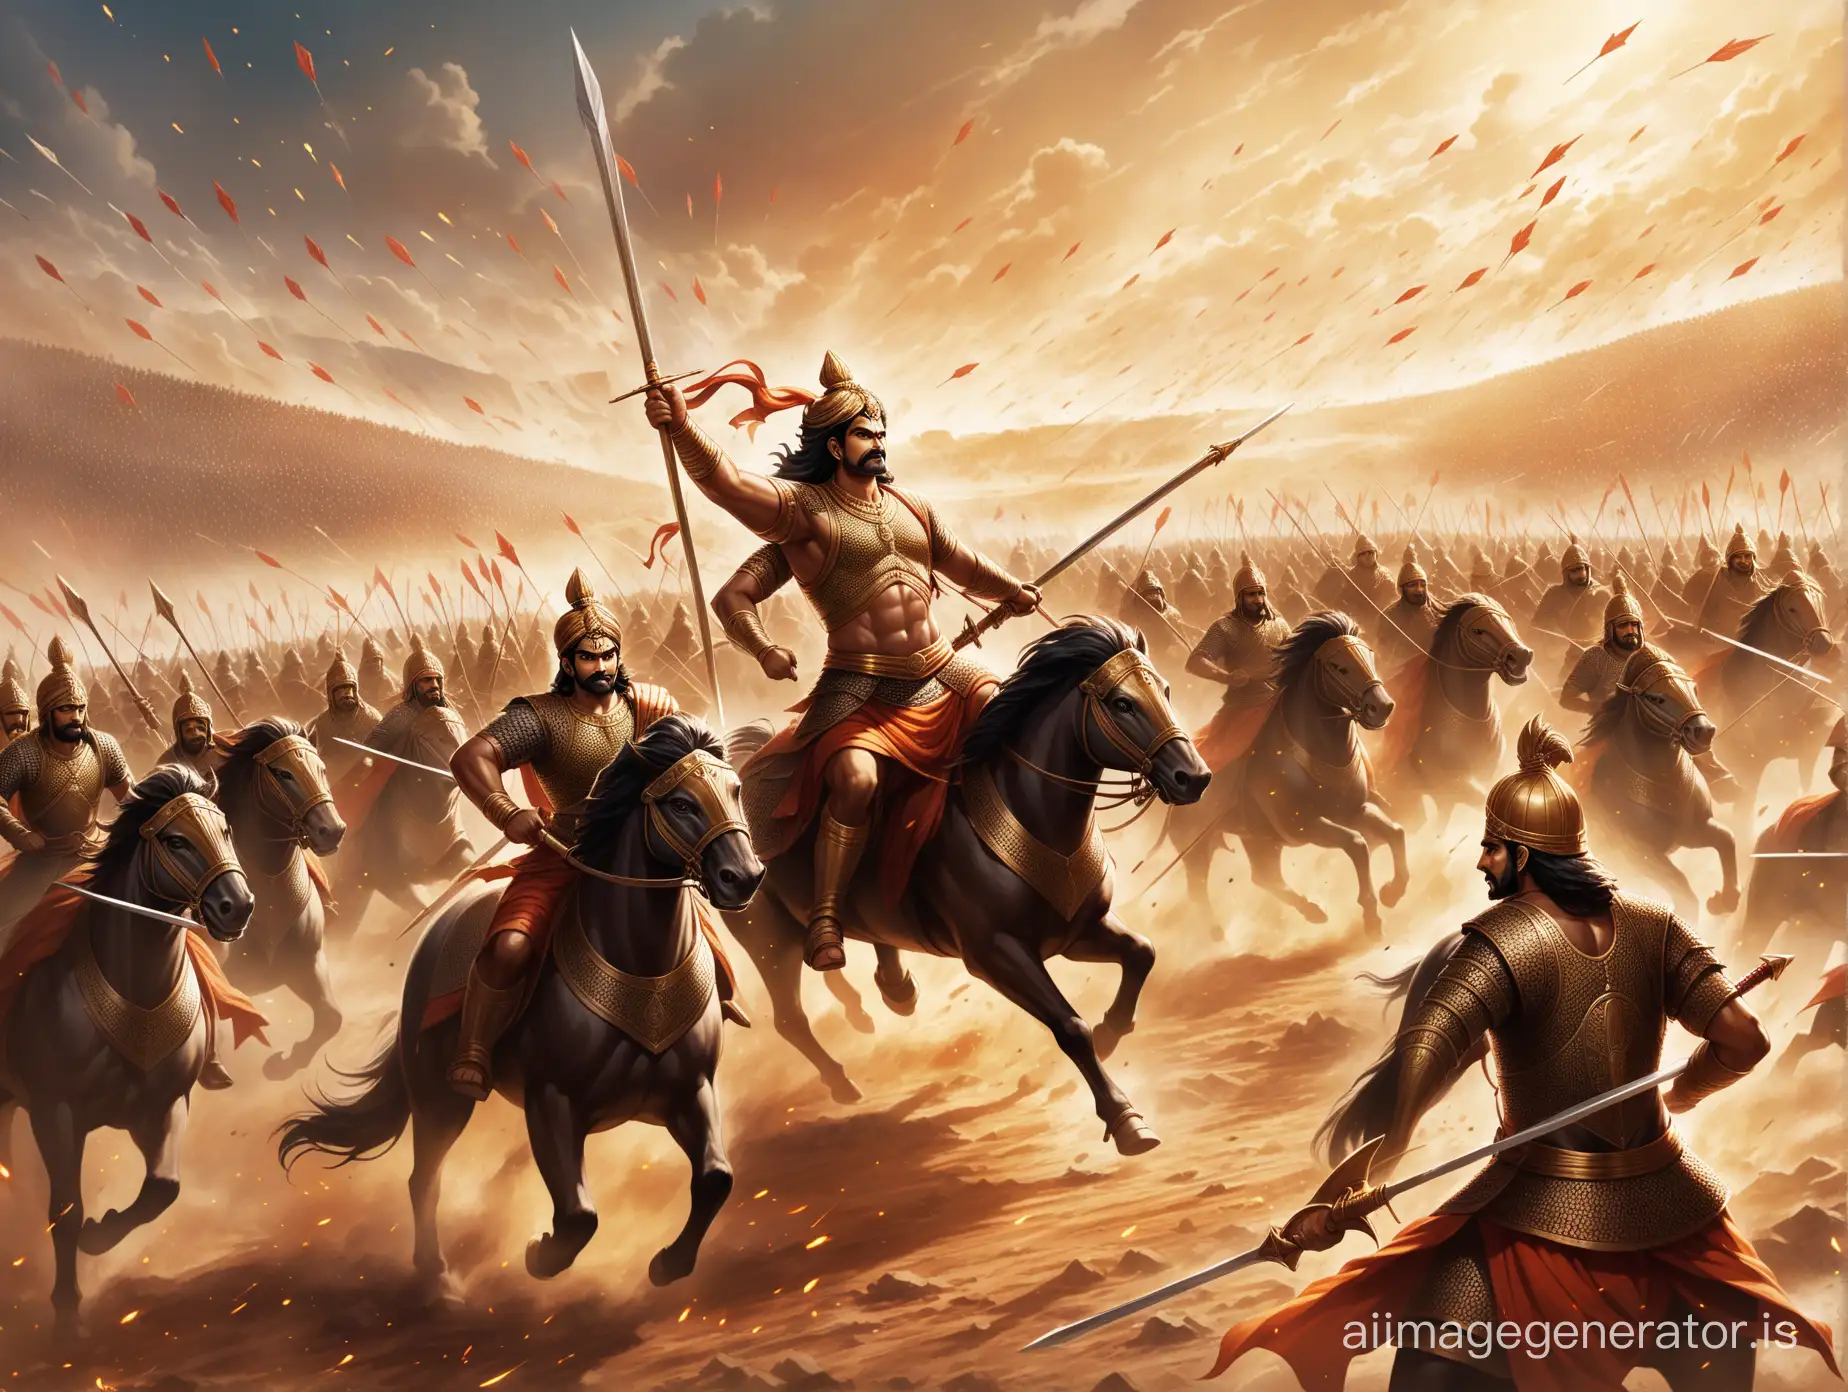 A chaotic scene of clashes between the two armies on a vast battlefield, with warriors charging into battle, swords clashing, and arrows flying through the air, while amidst the chaos, King Arjun stands tall, rallying his troops with a determined gaze.